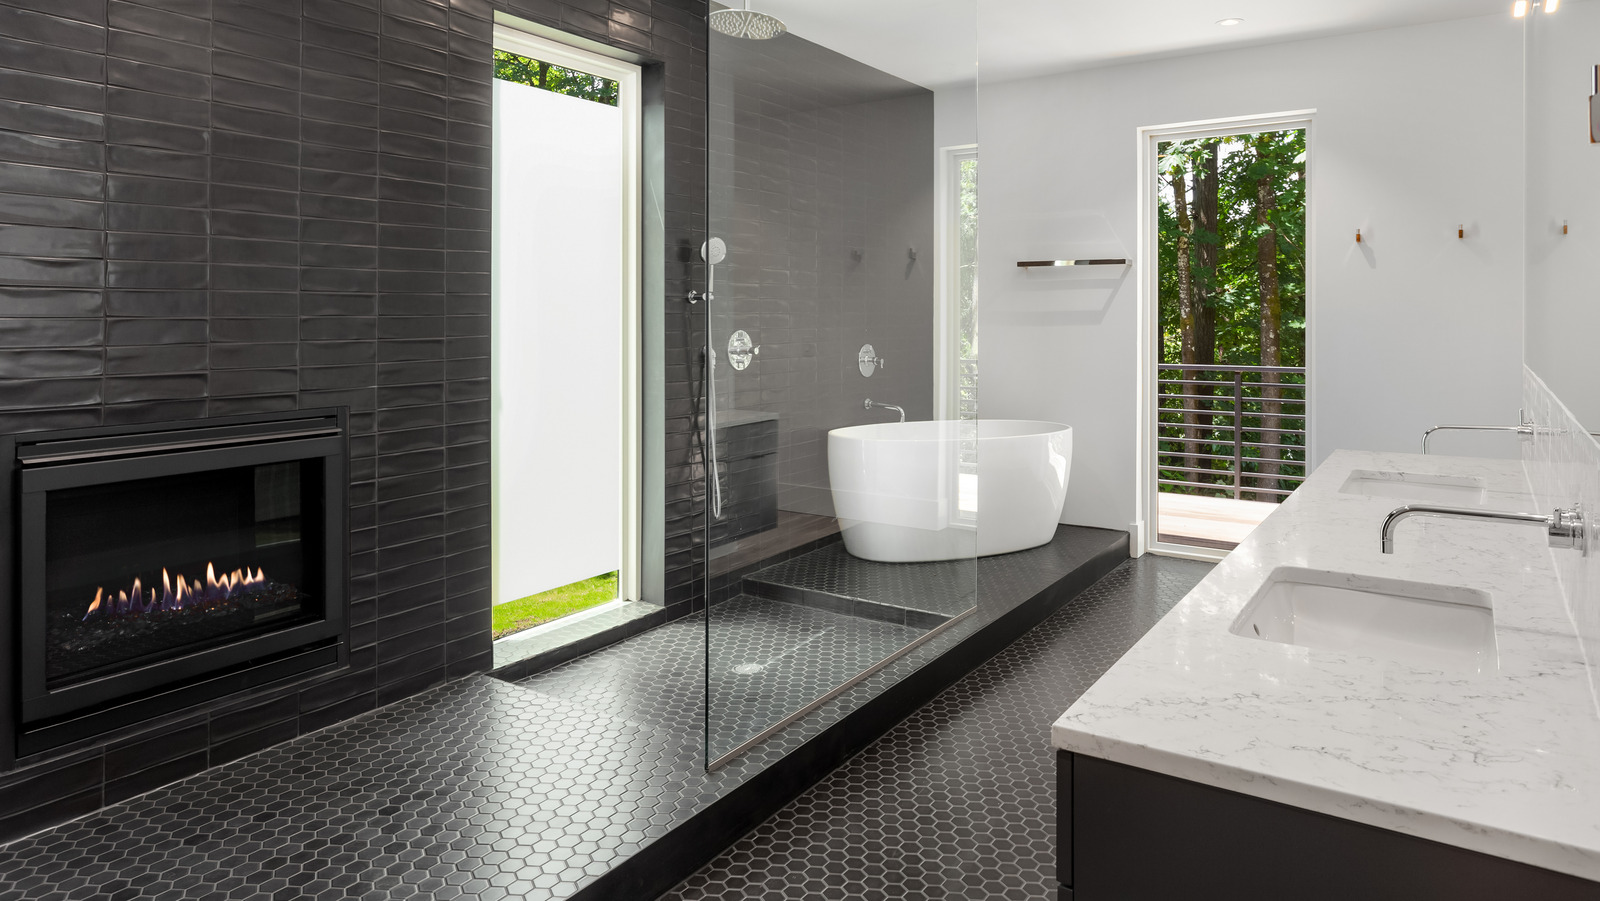 25 Black-And-White Bathrooms That Prove Simple Is Best When Decorating Your Home